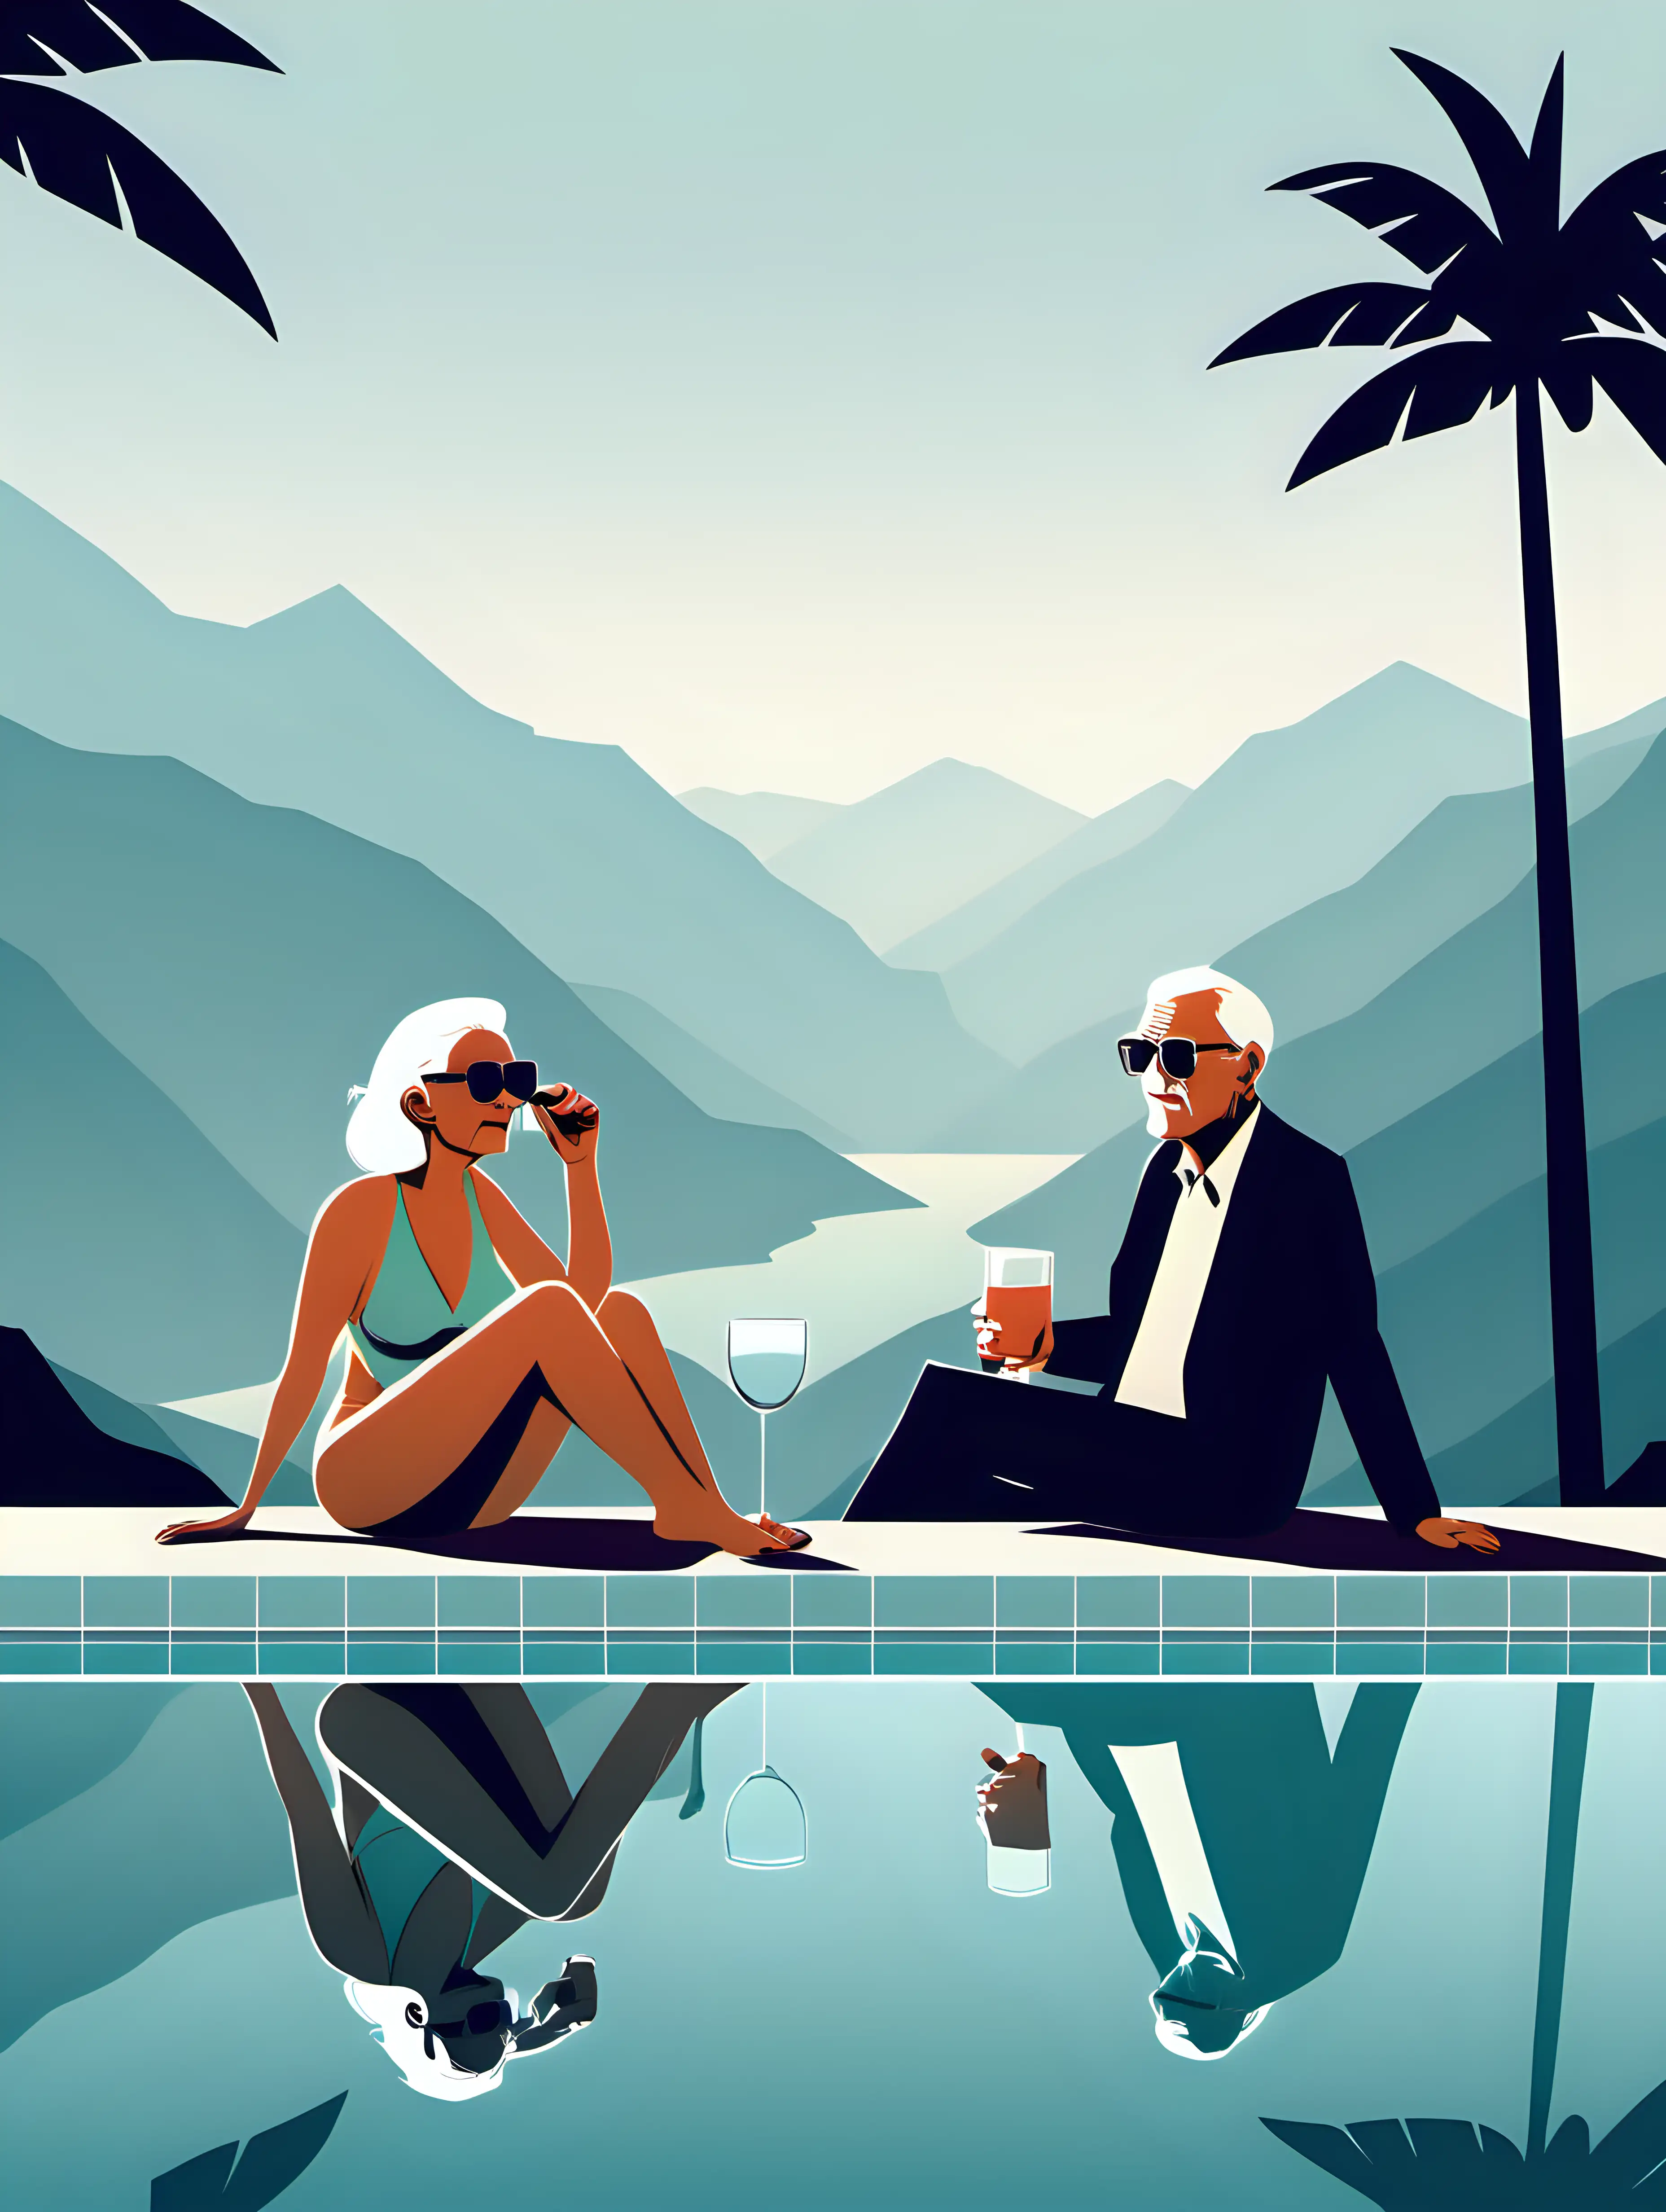 Tropical Poolside Relaxation Elderly Couple Enjoying Sunglasses and Refreshing Beverages